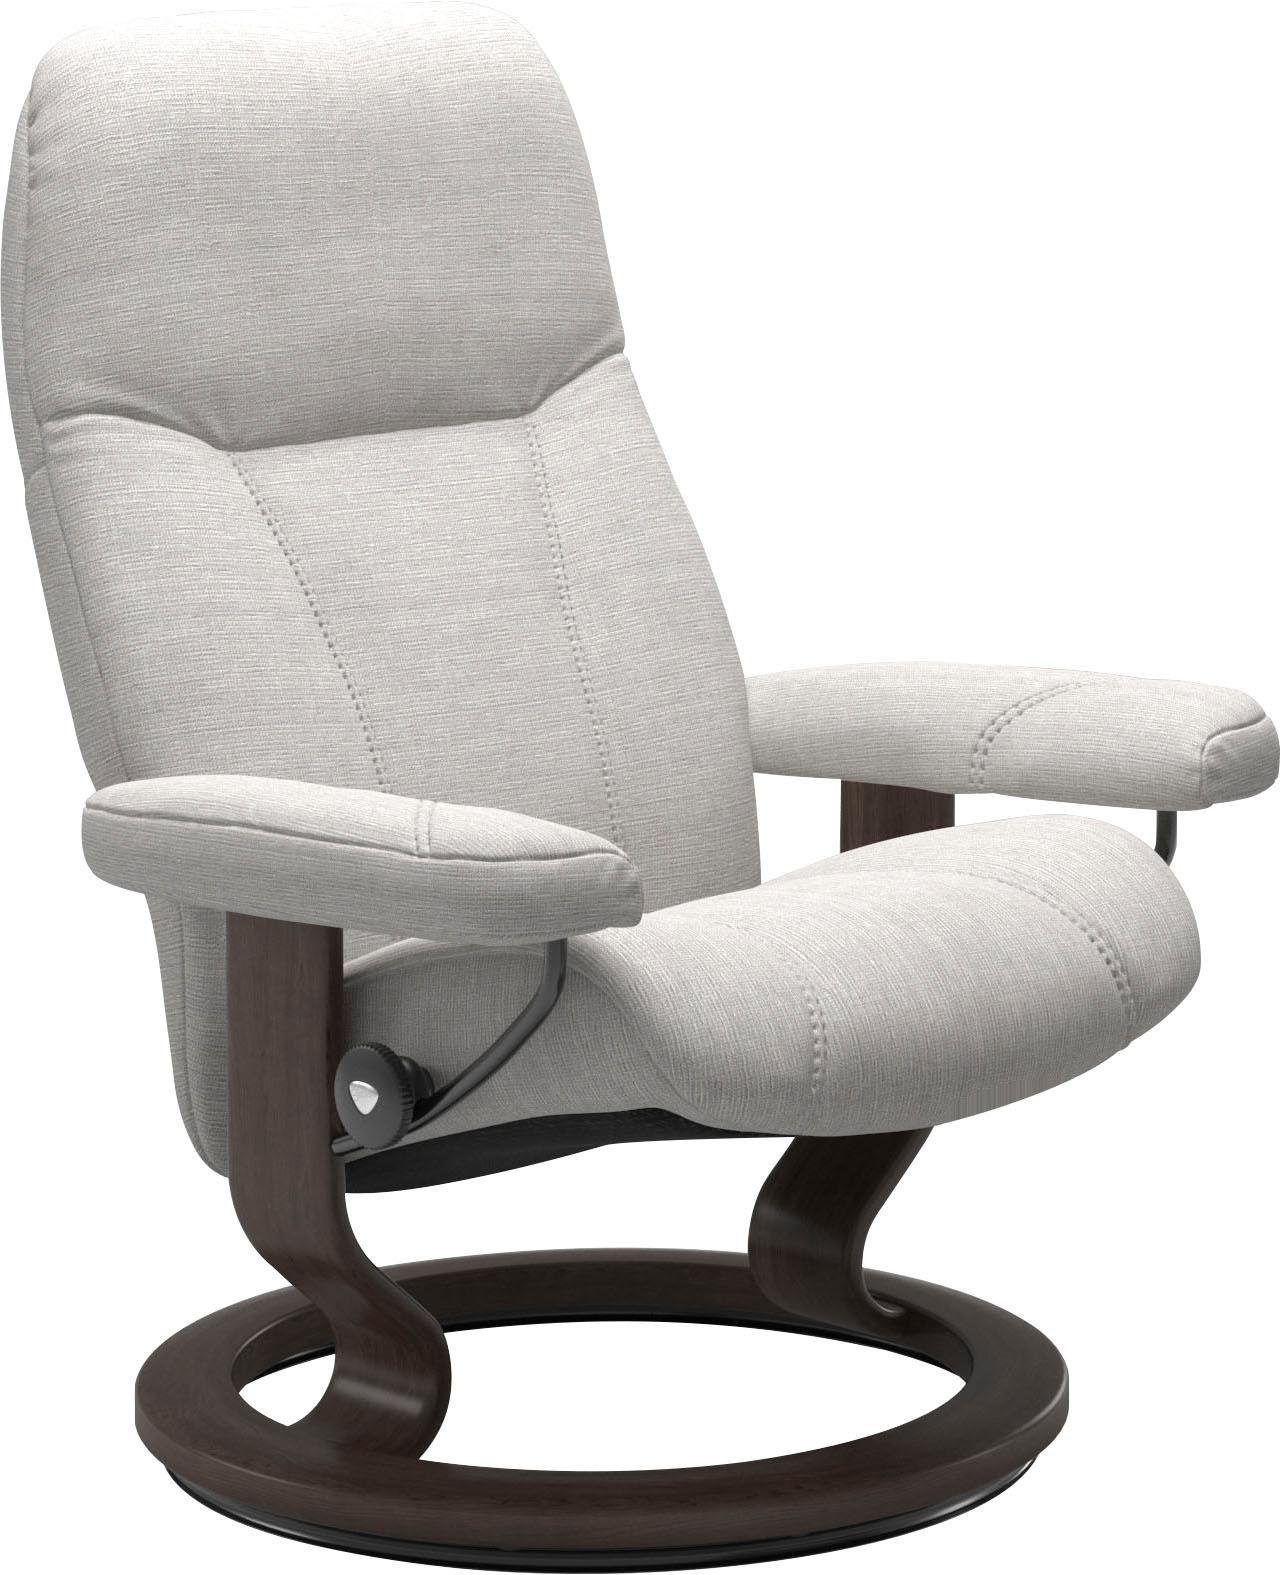 Consul, M, Größe mit Classic Relaxsessel Gestell Stressless® Wenge Base,